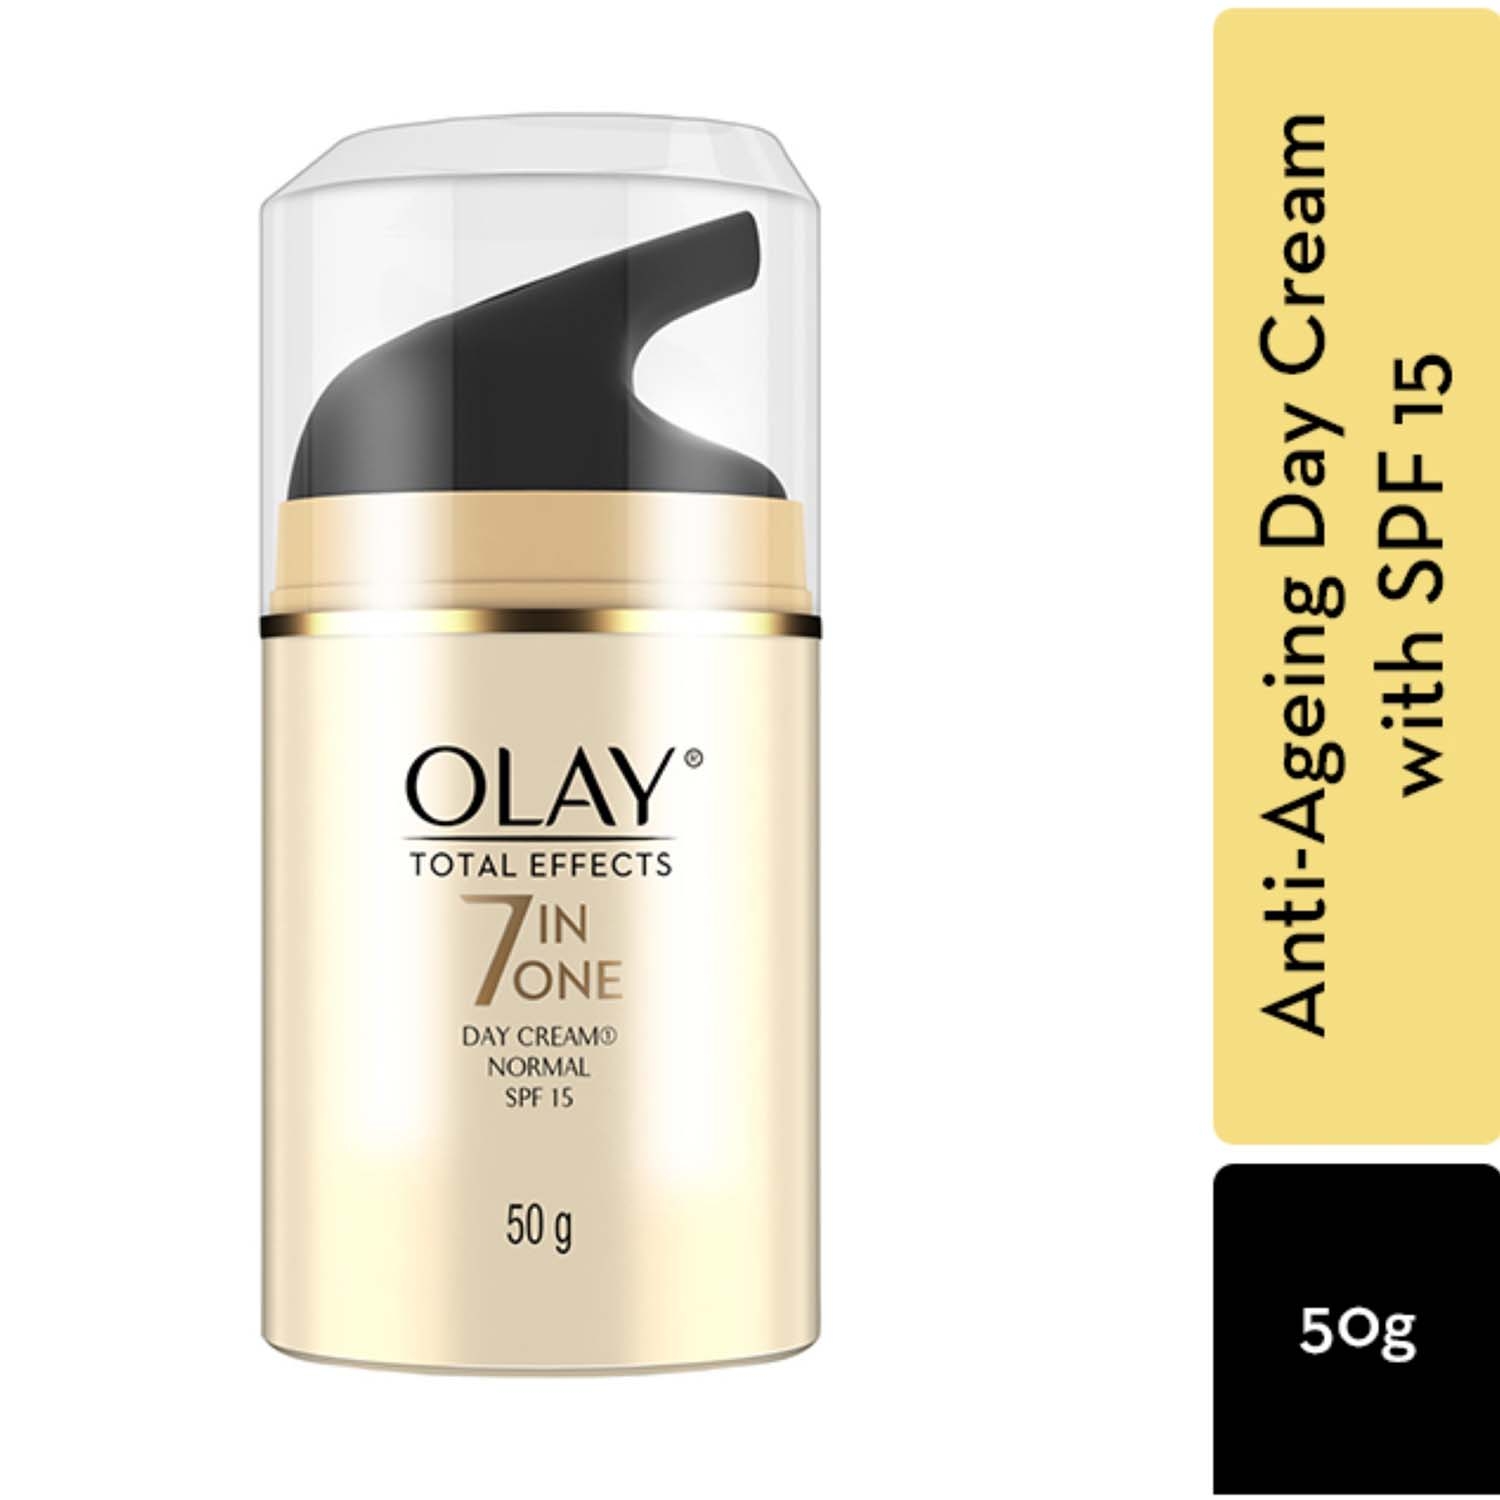 Olay | Olay 7-In-1 Total Effects Anti Ageing Day Cream SPF 15 (50g)